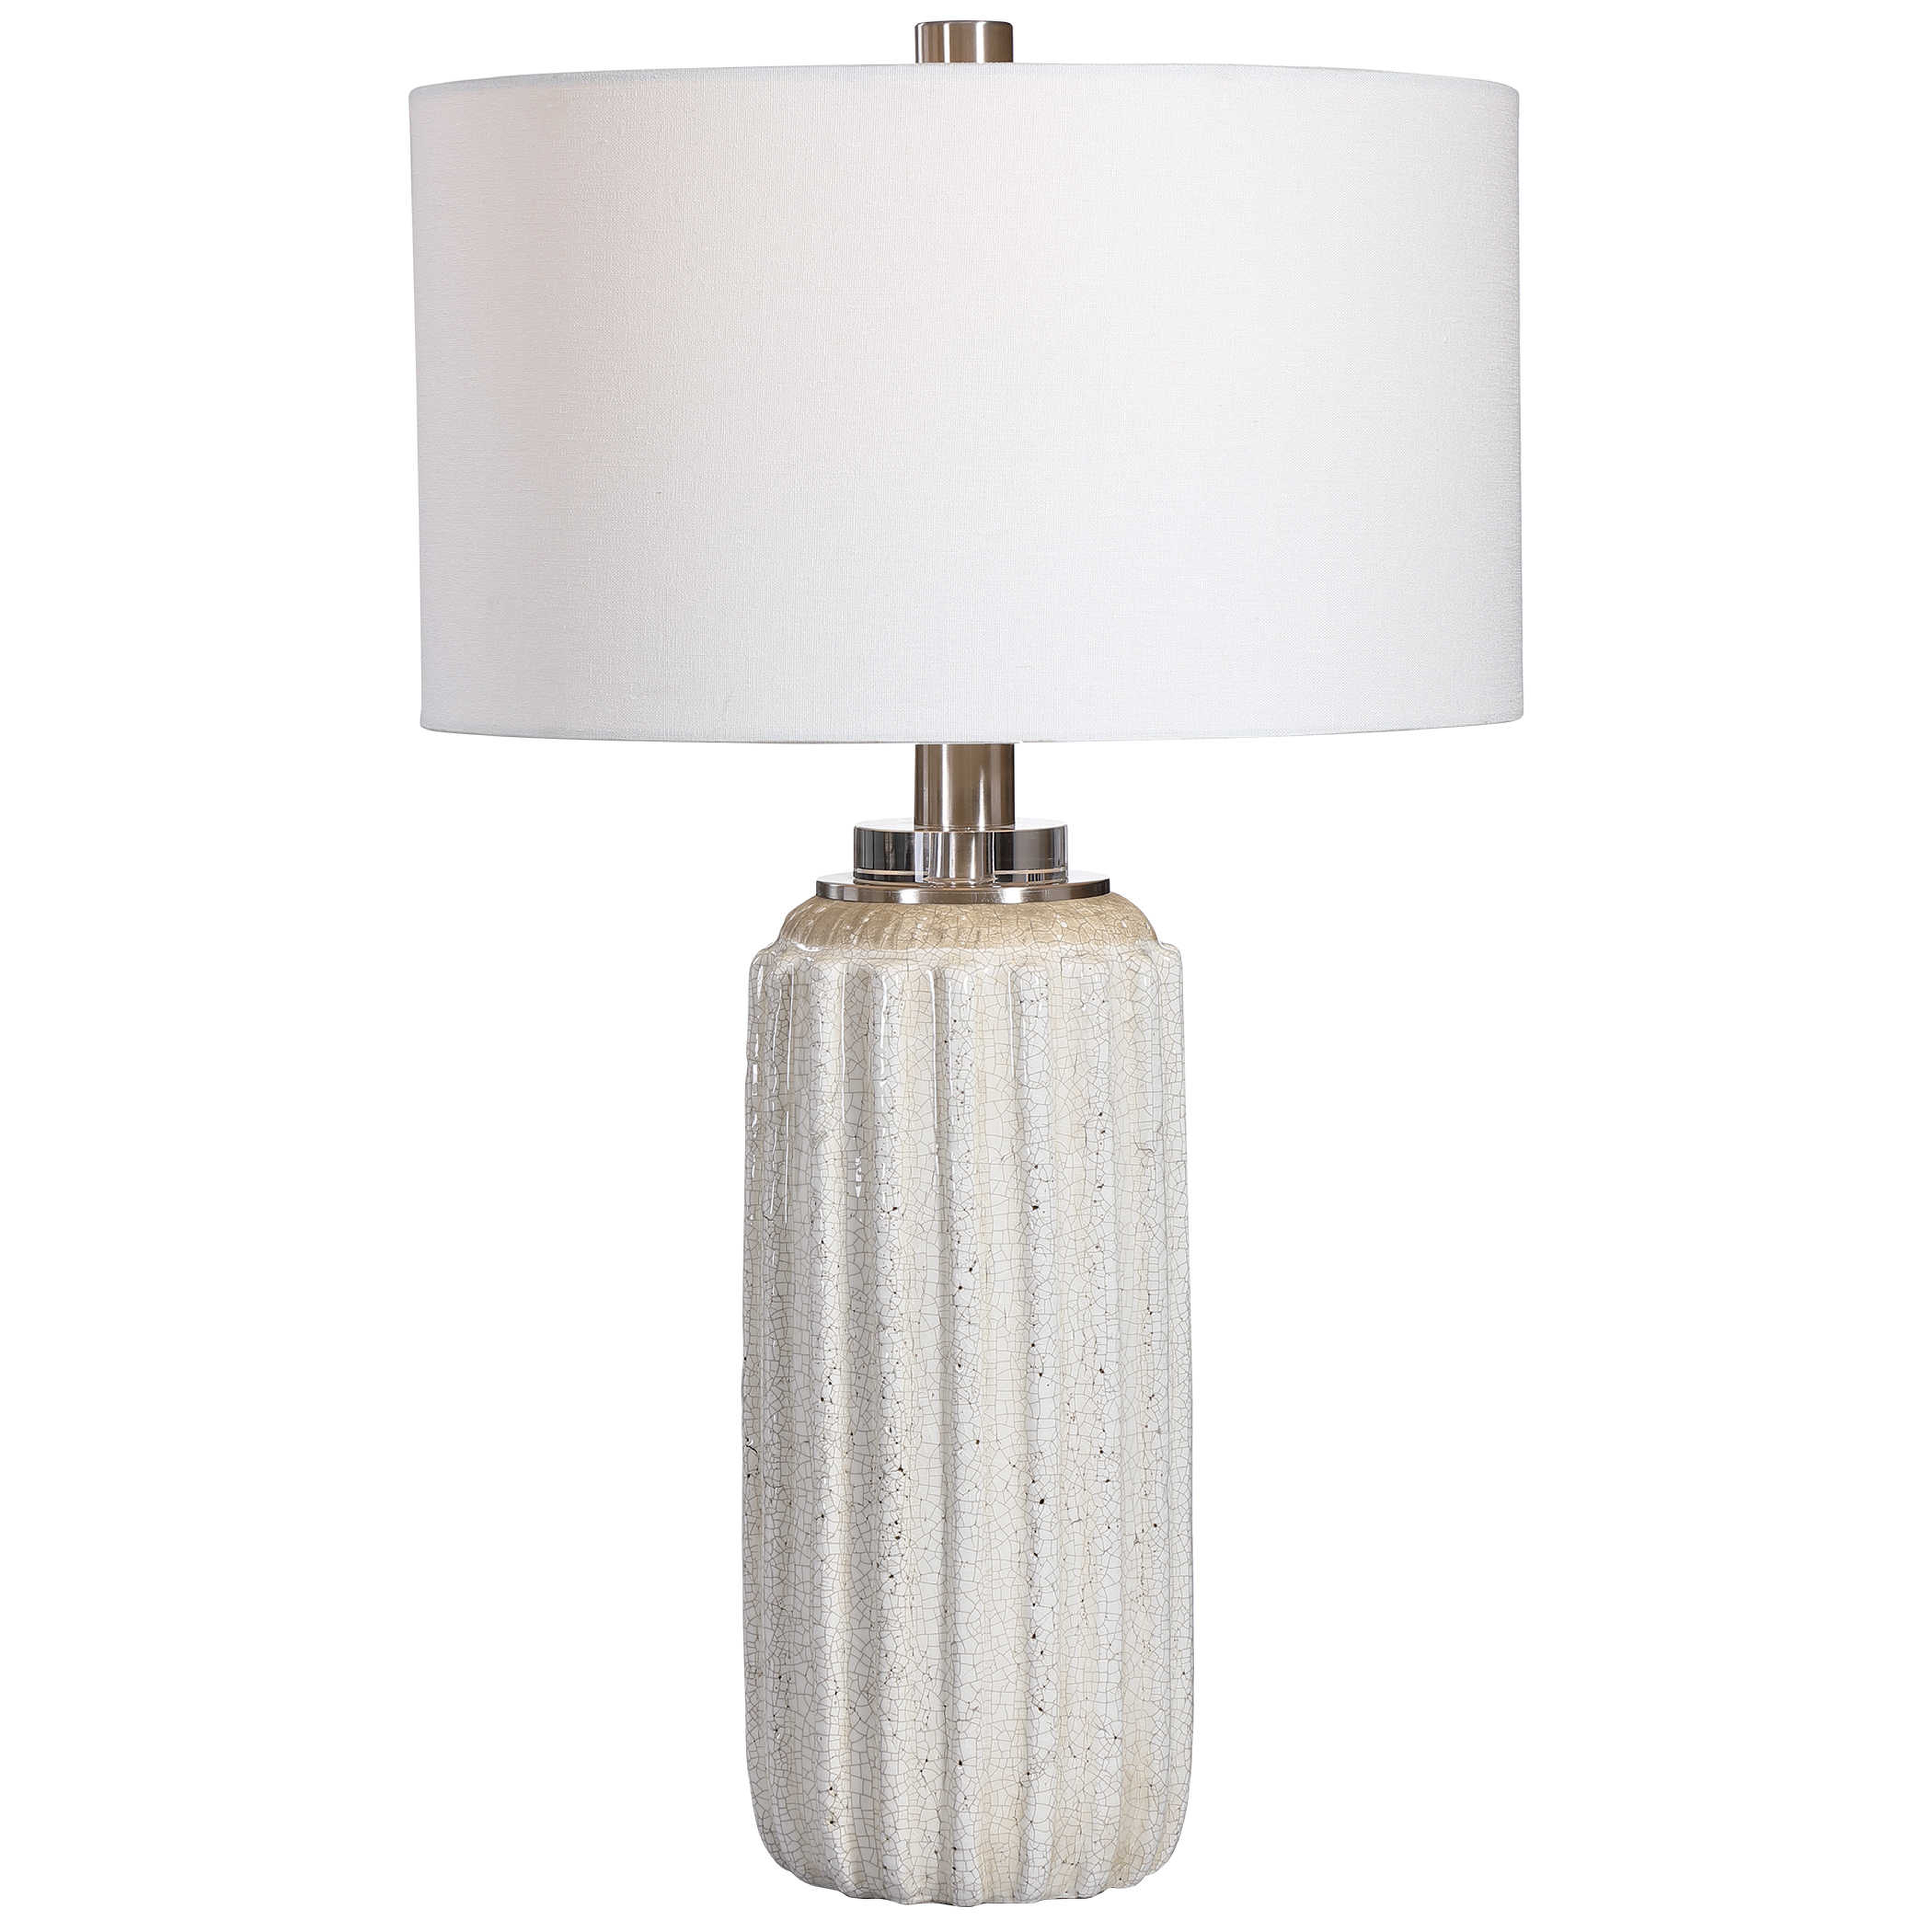 Azariah Crackle Table Lamp, White, 29" - Hudsonhill Foundry